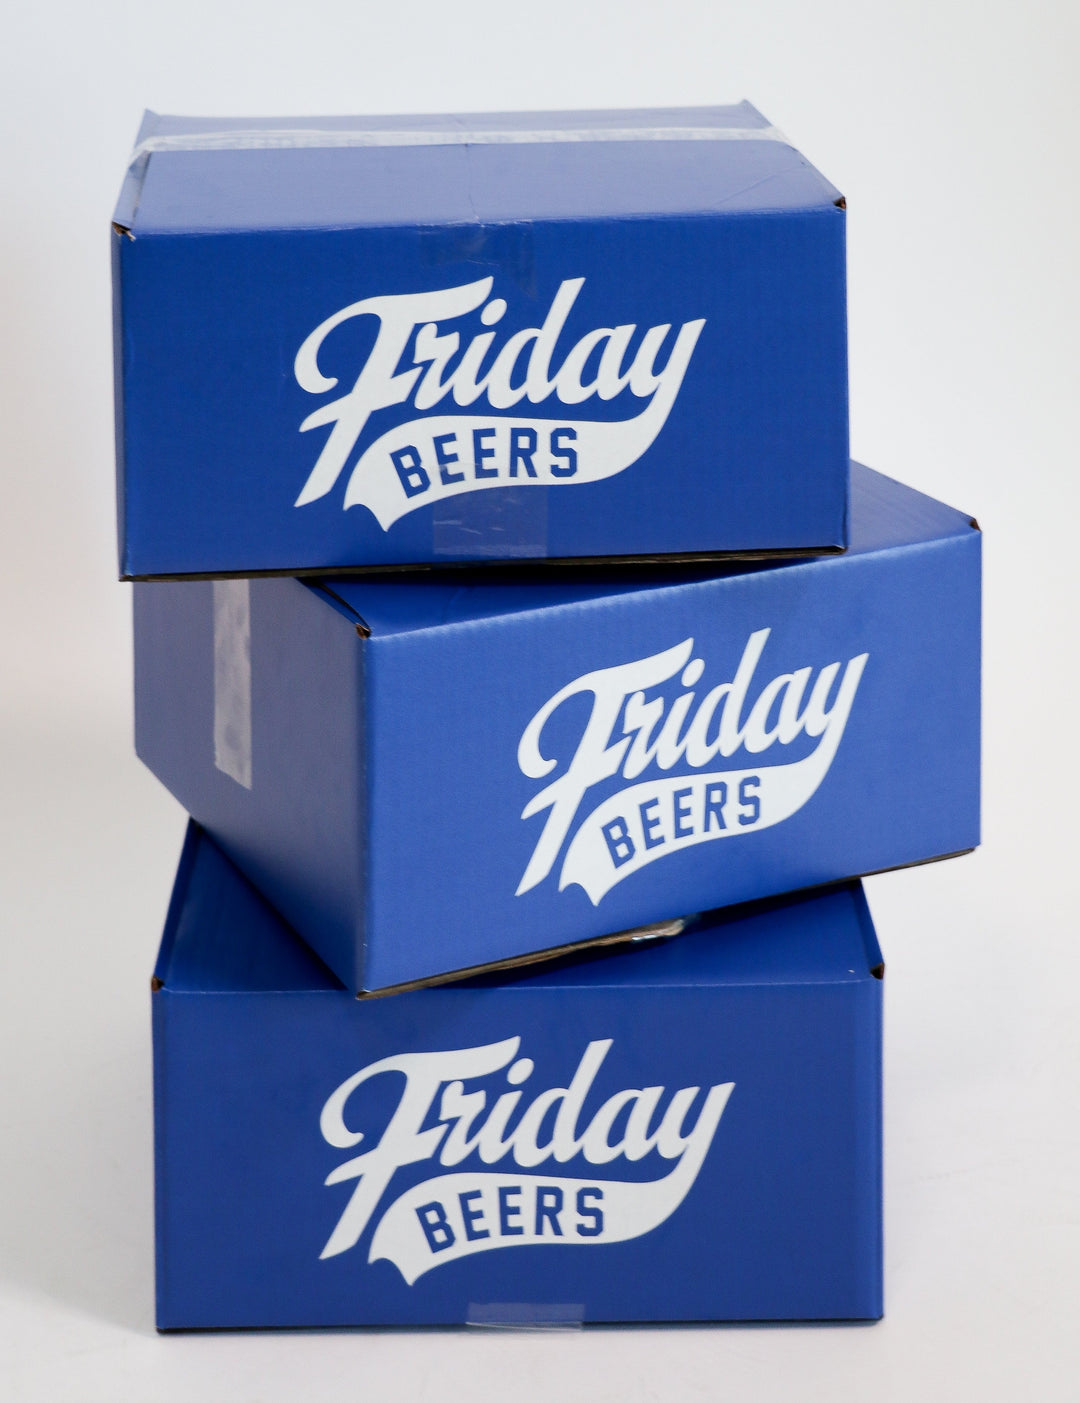 FRIDAY BEERS HOLIDAY MYSTERY BOX (10 ITEMS) – Friday Beers